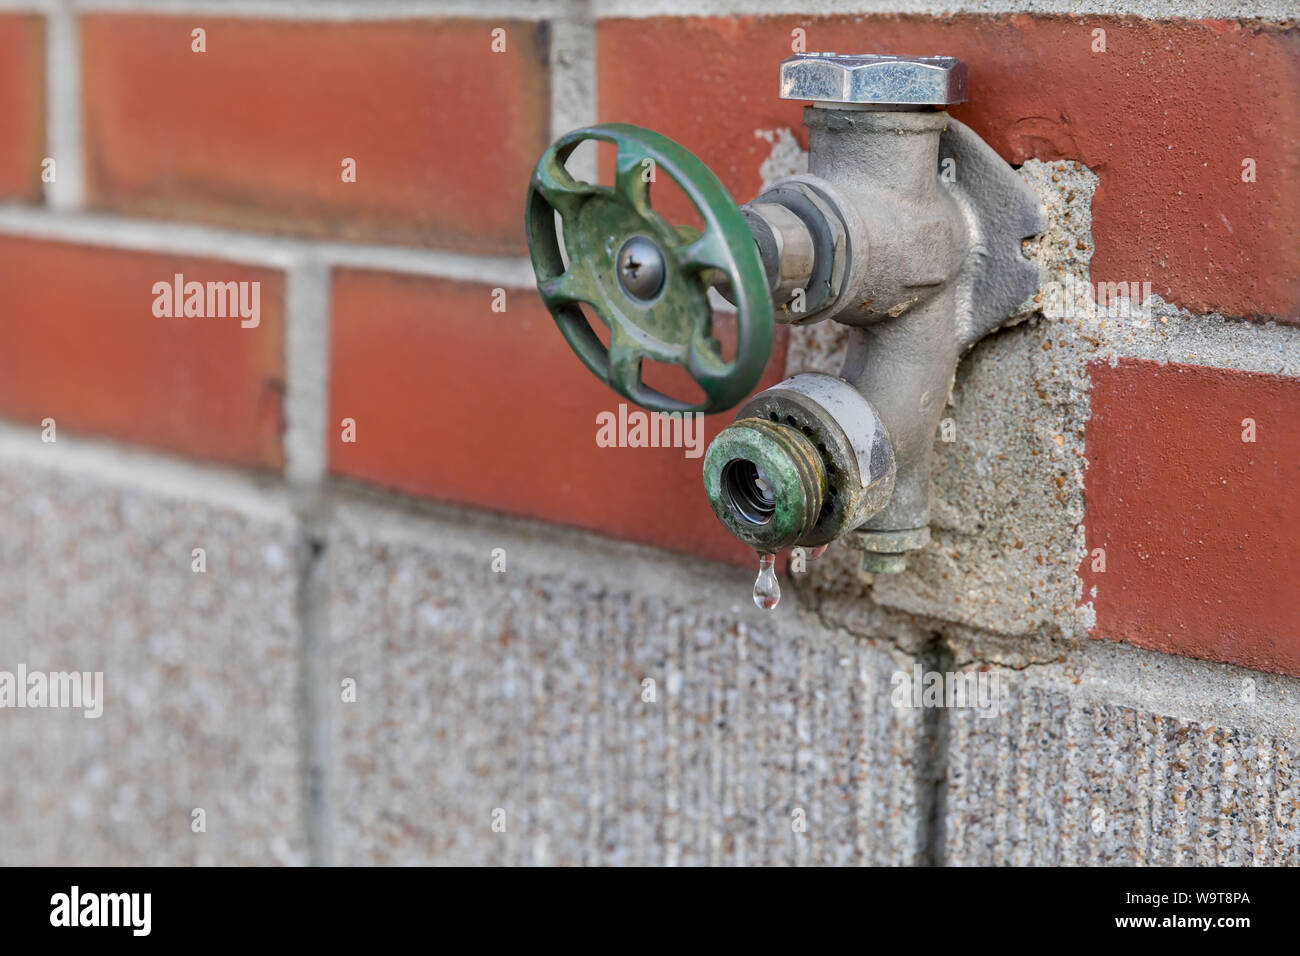 Old corroded outdoor water spigot, faucet, or tap leaking, dripping water and needing repair Stock Photo